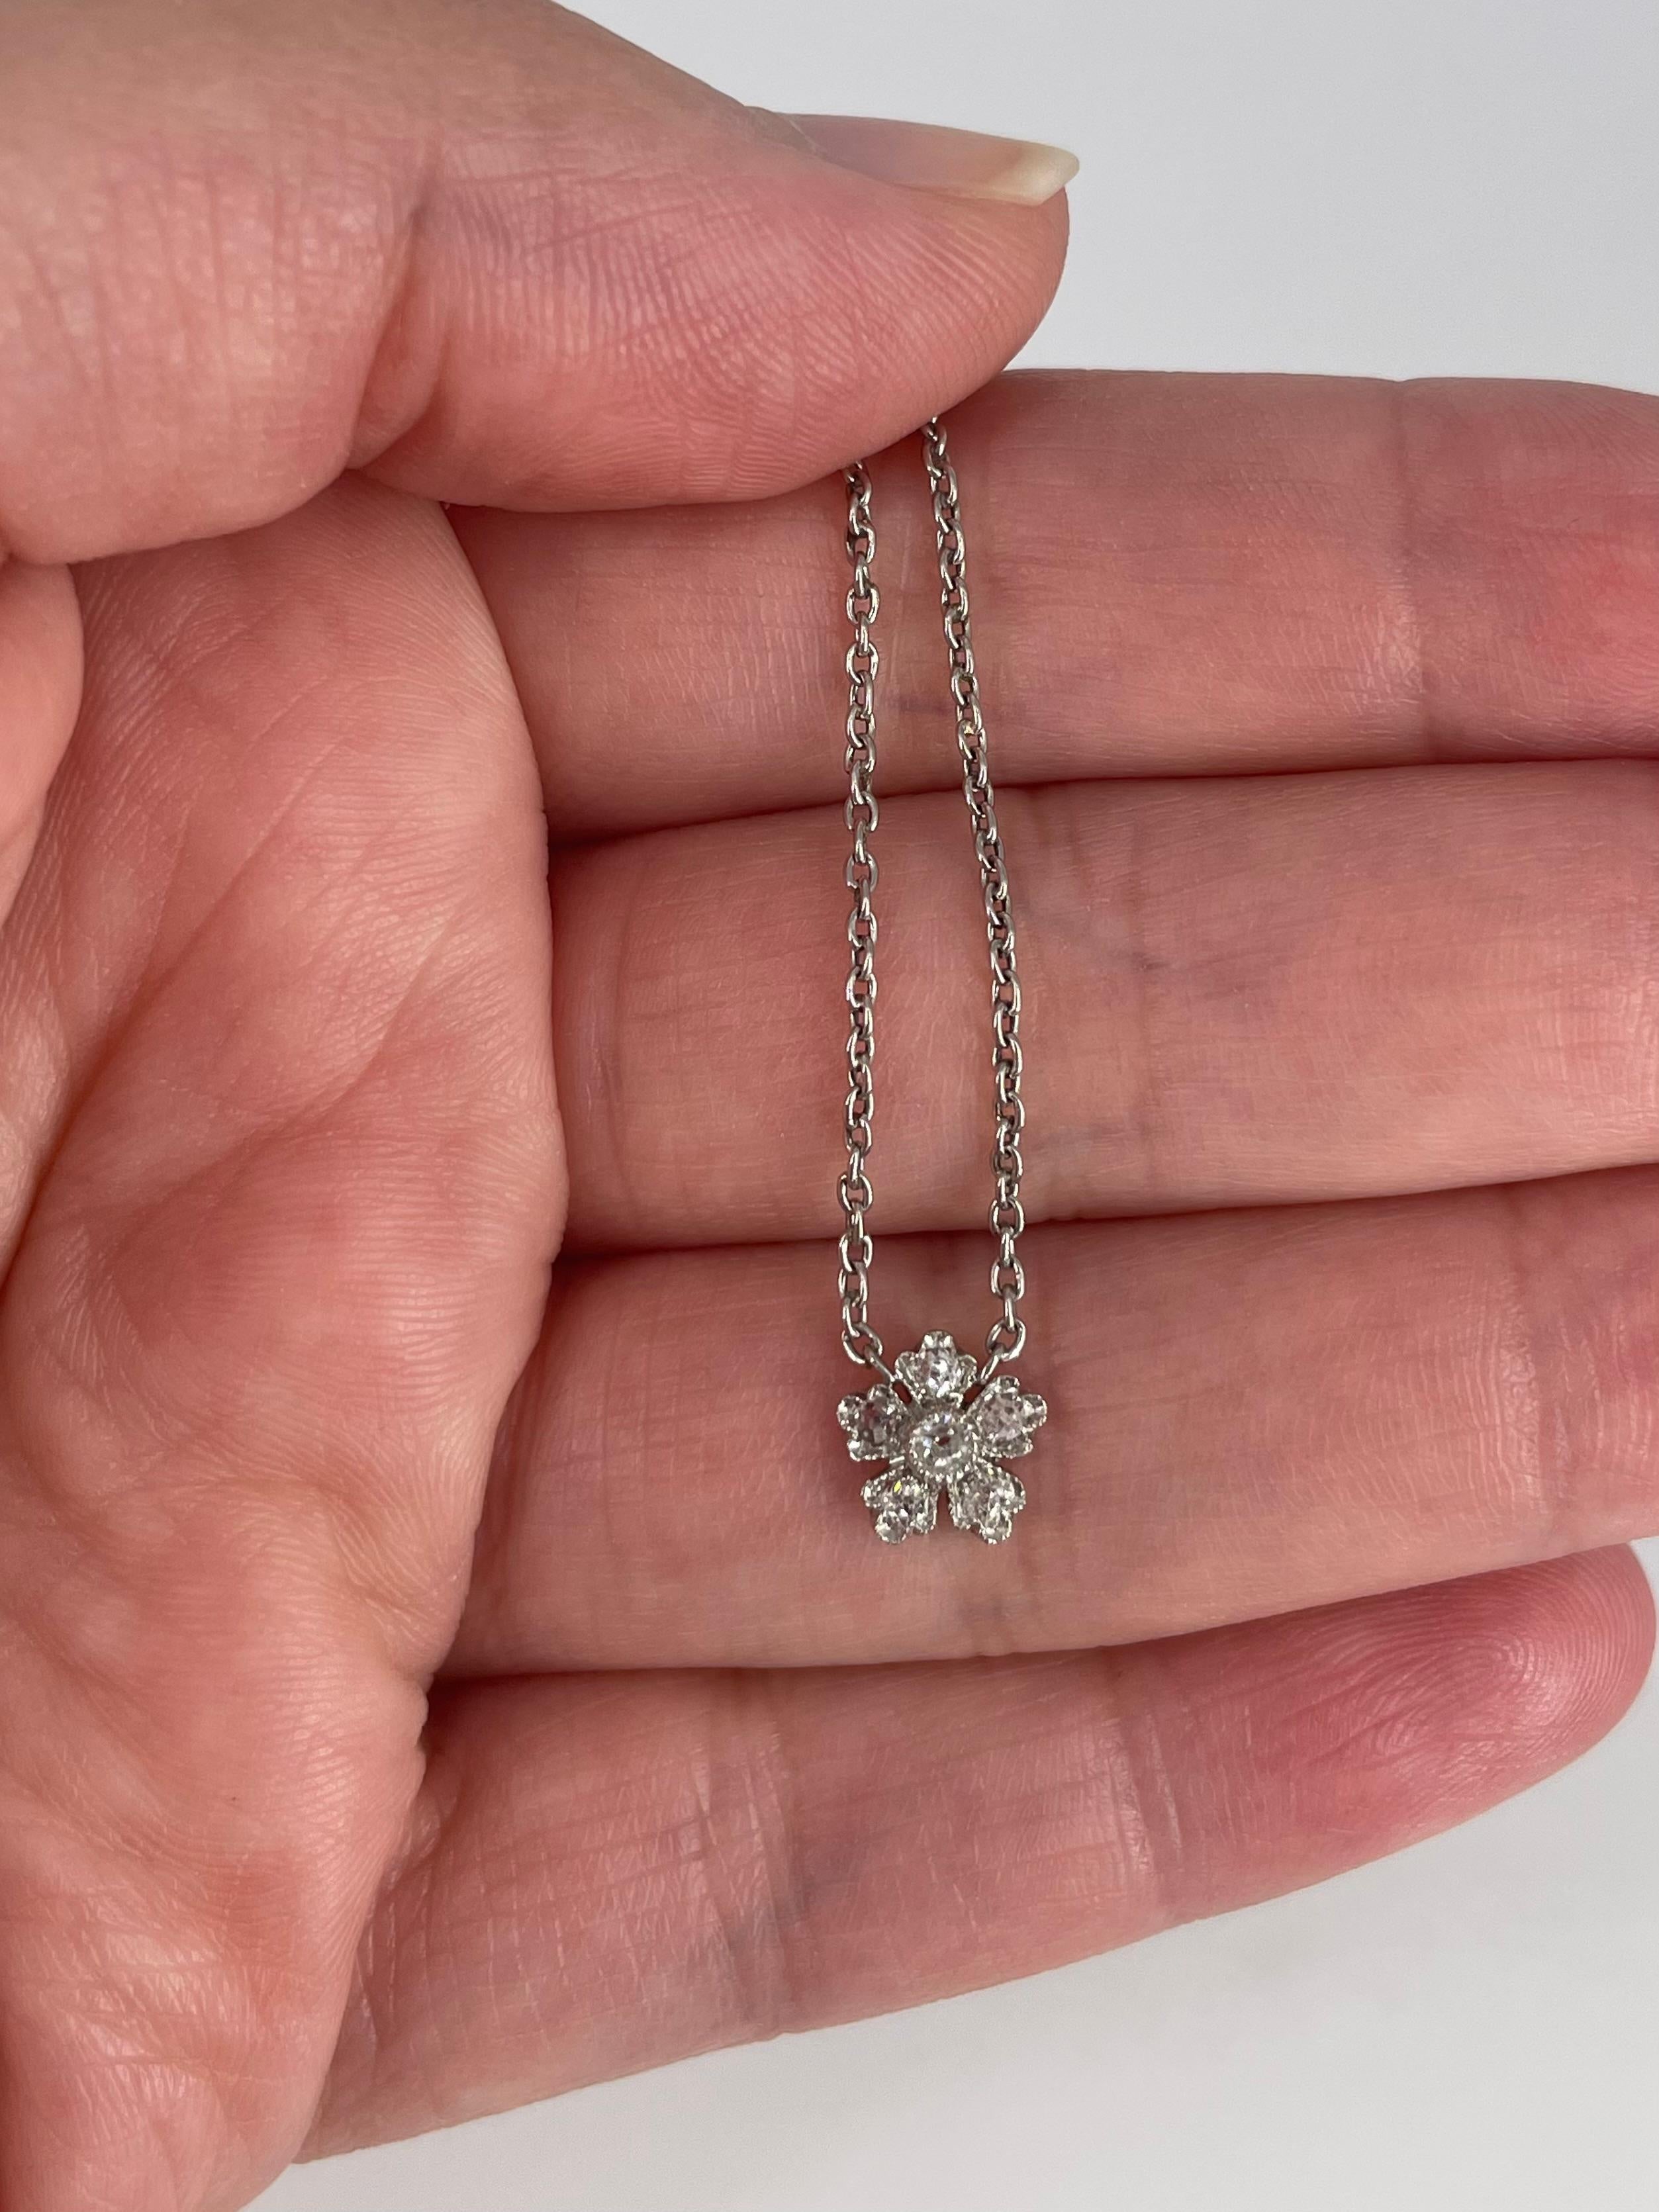 This sweet antique pendant necklace is the perfect accent to any look! J. Birnbach repurposed an antique pin, using the flower design to create this pendant. The flower features antique cut round diamonds and delicate millgrain detail. The chain is